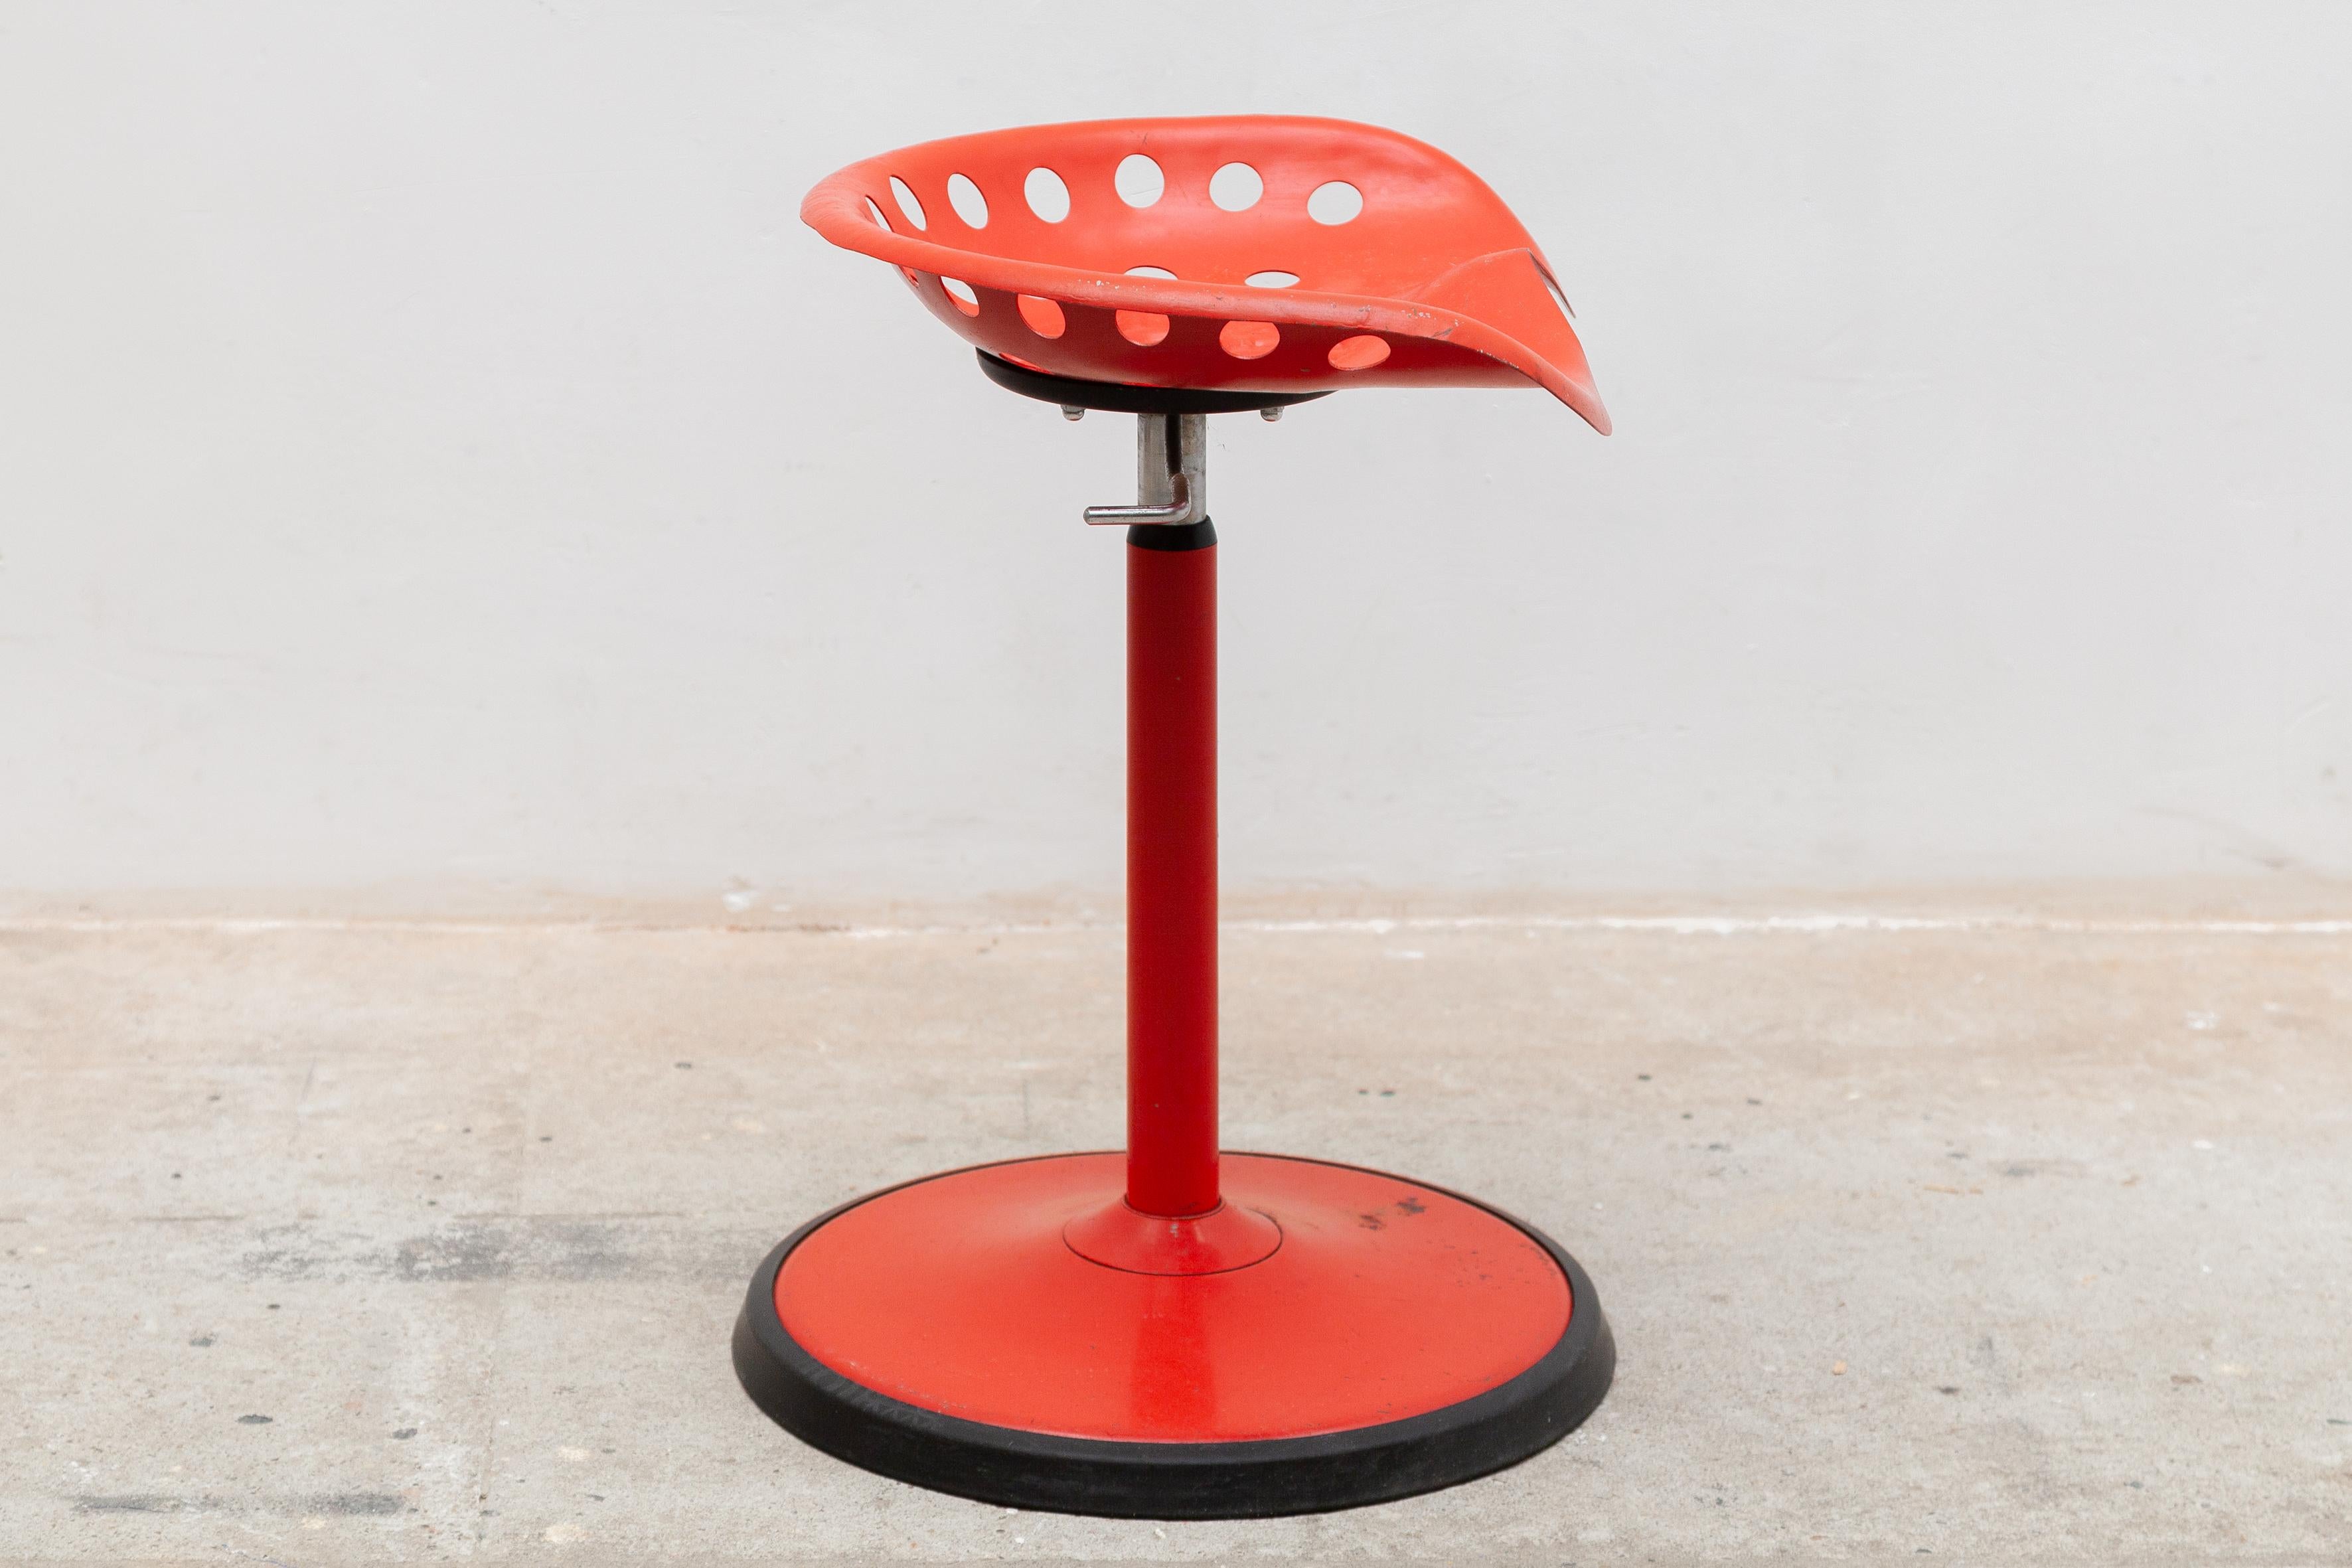 Mid-Century Modern Red Tractor Seat Stool Designed by Etienne Fermigier for Mirima, France